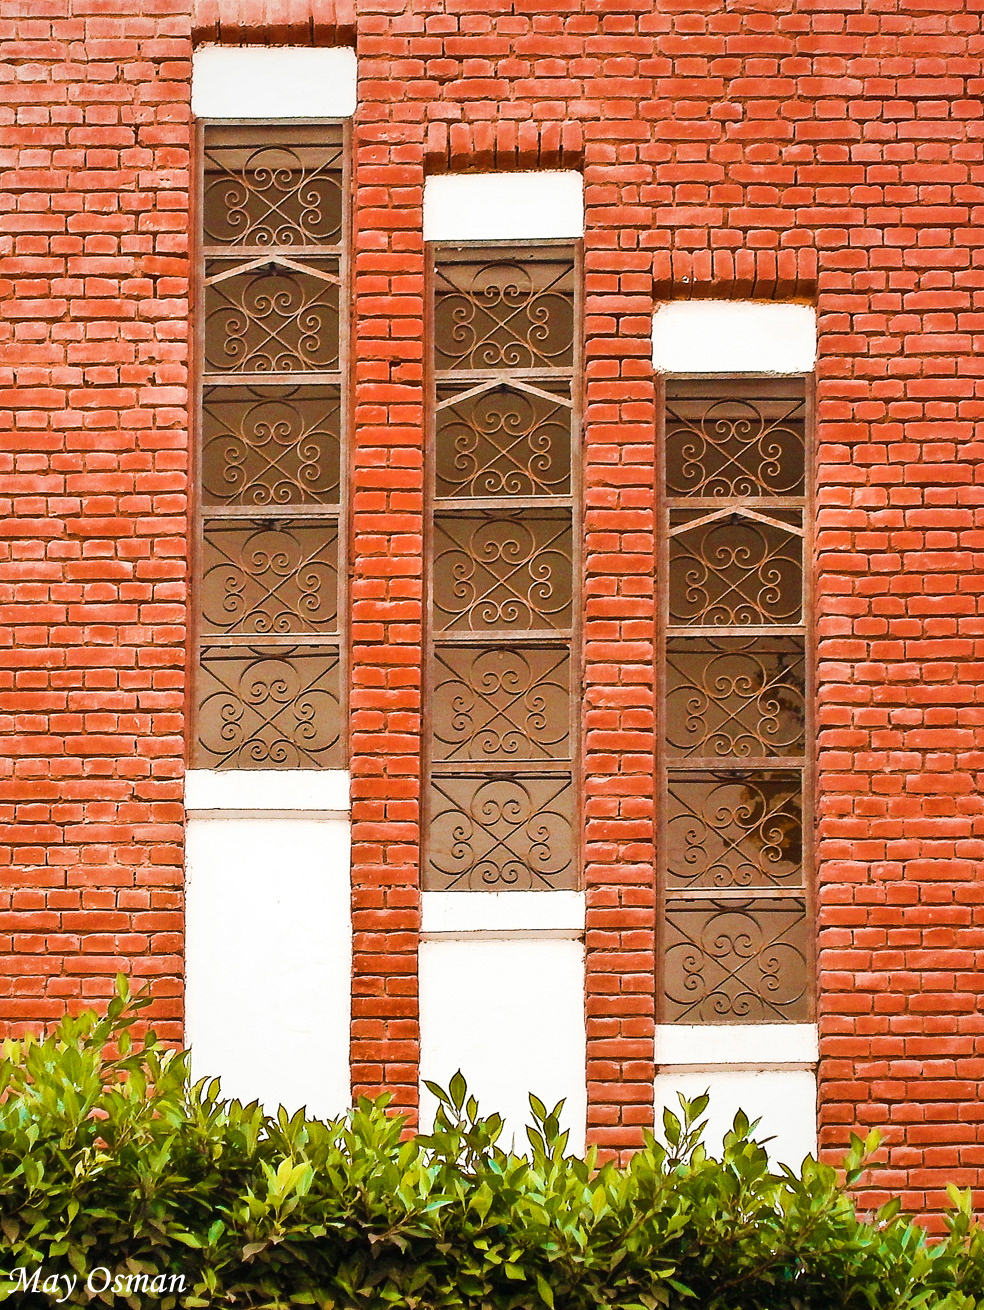 Window Architecture Photography